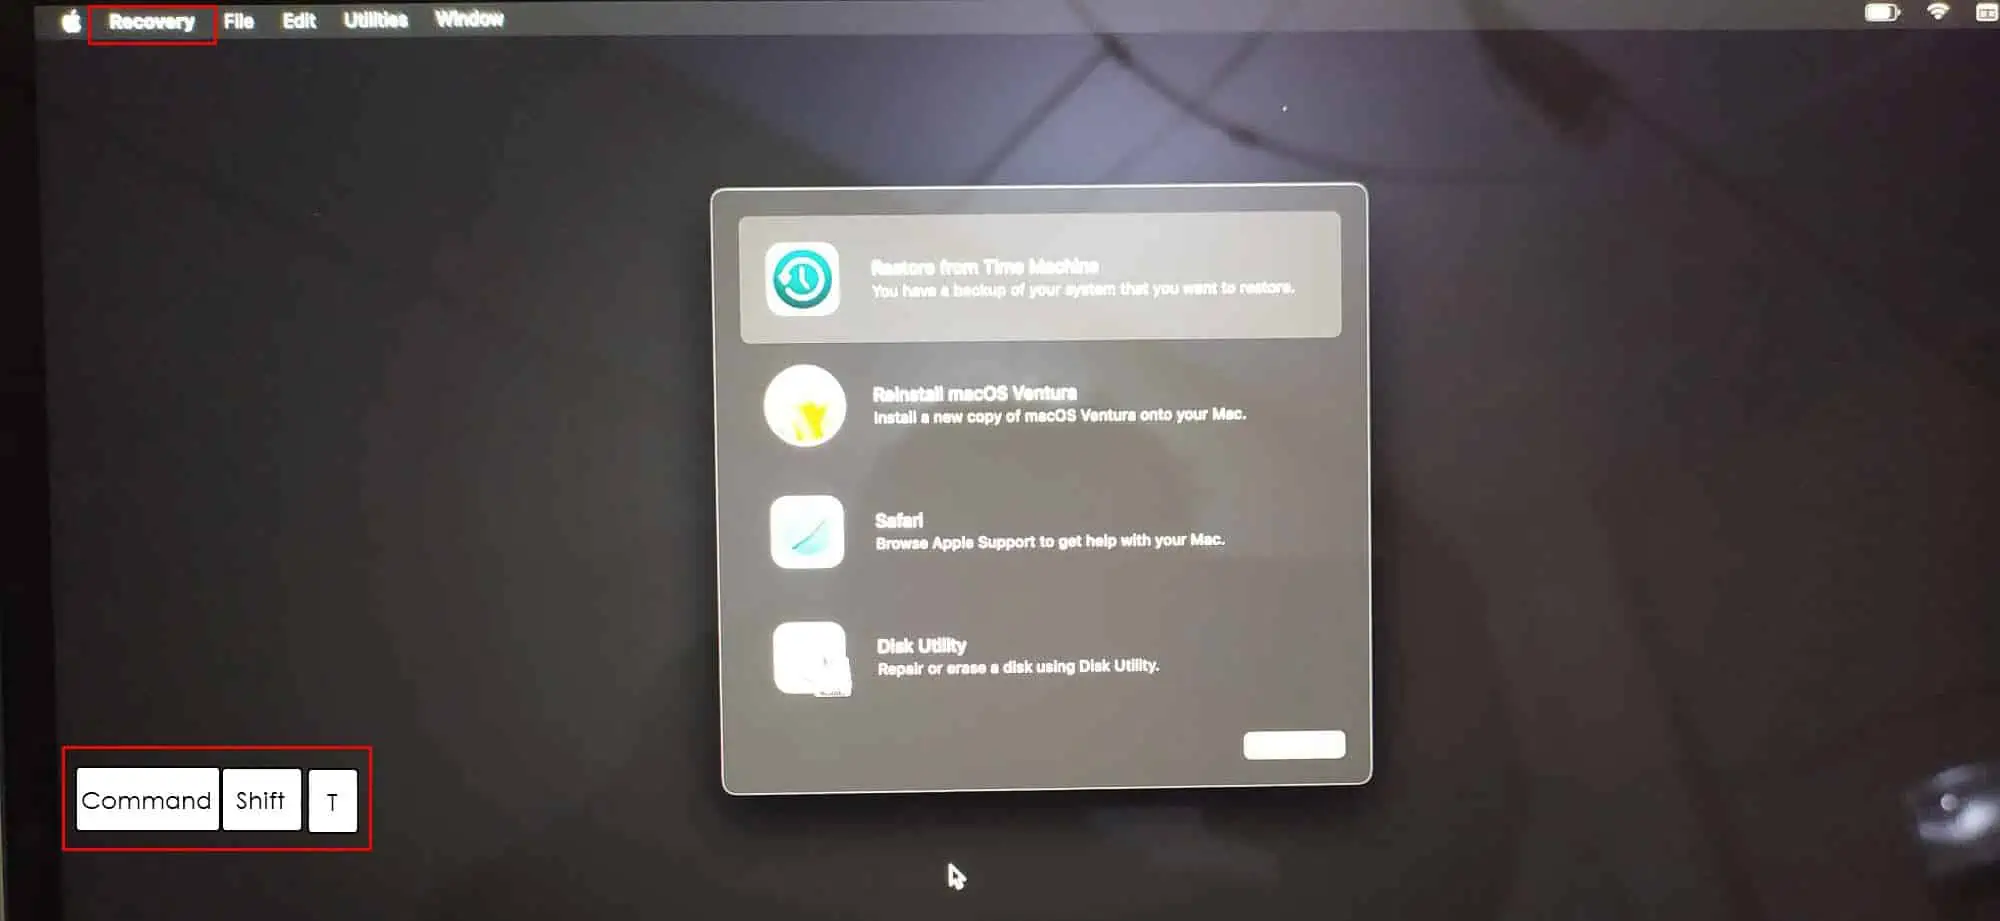 recovery utility screen on macbook pro